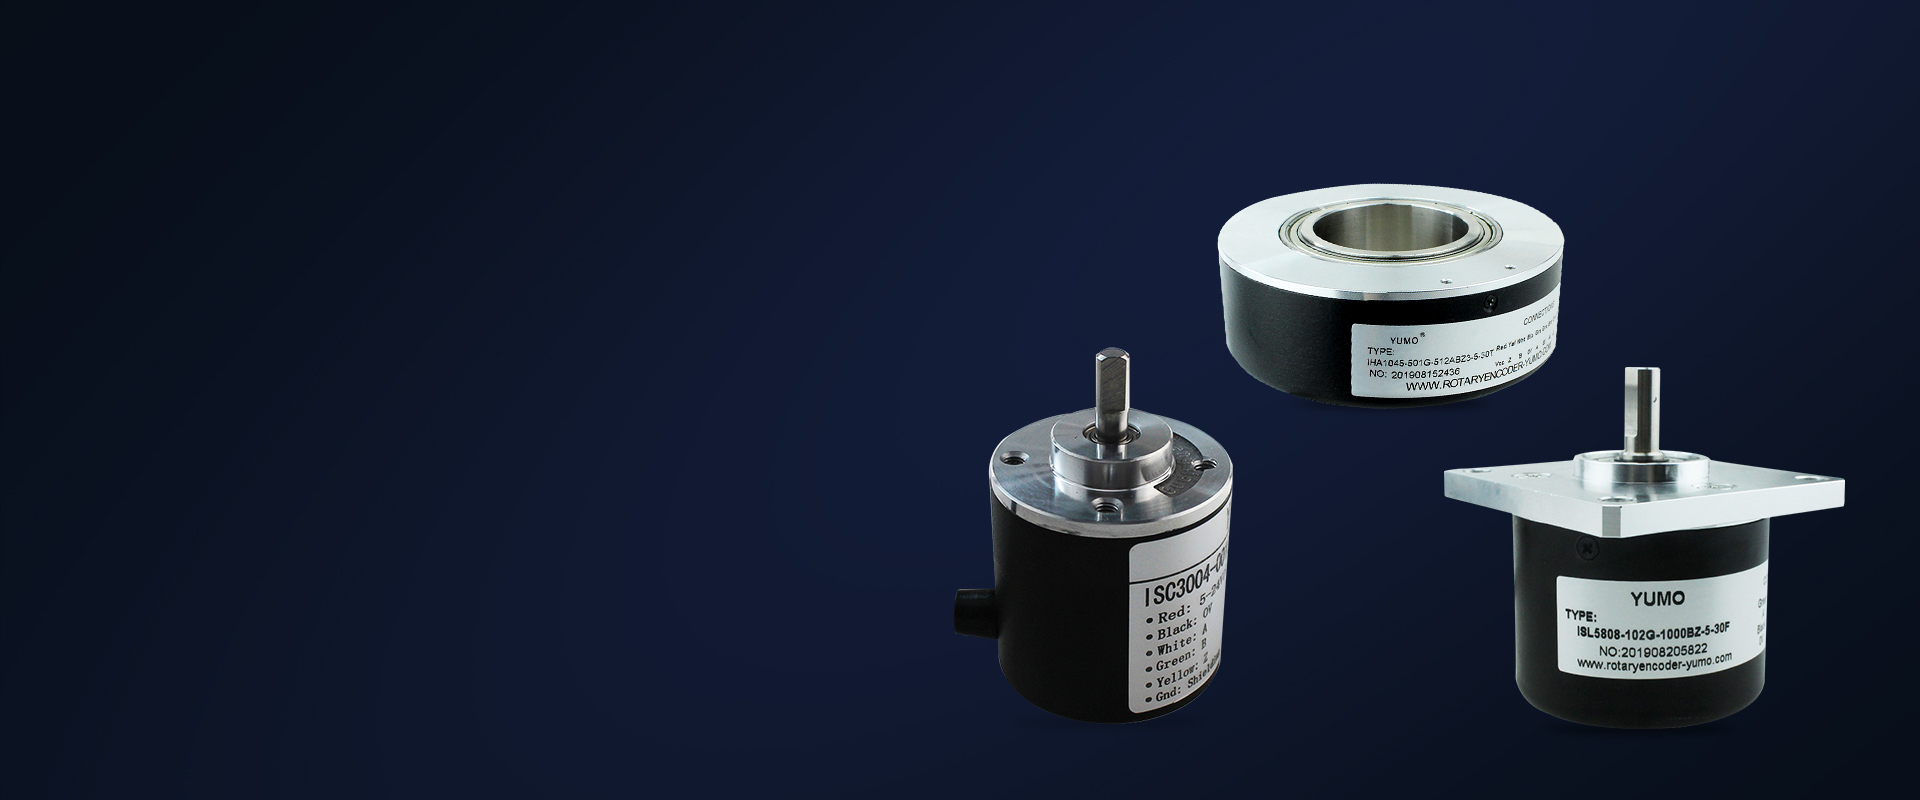 rotary encoder button